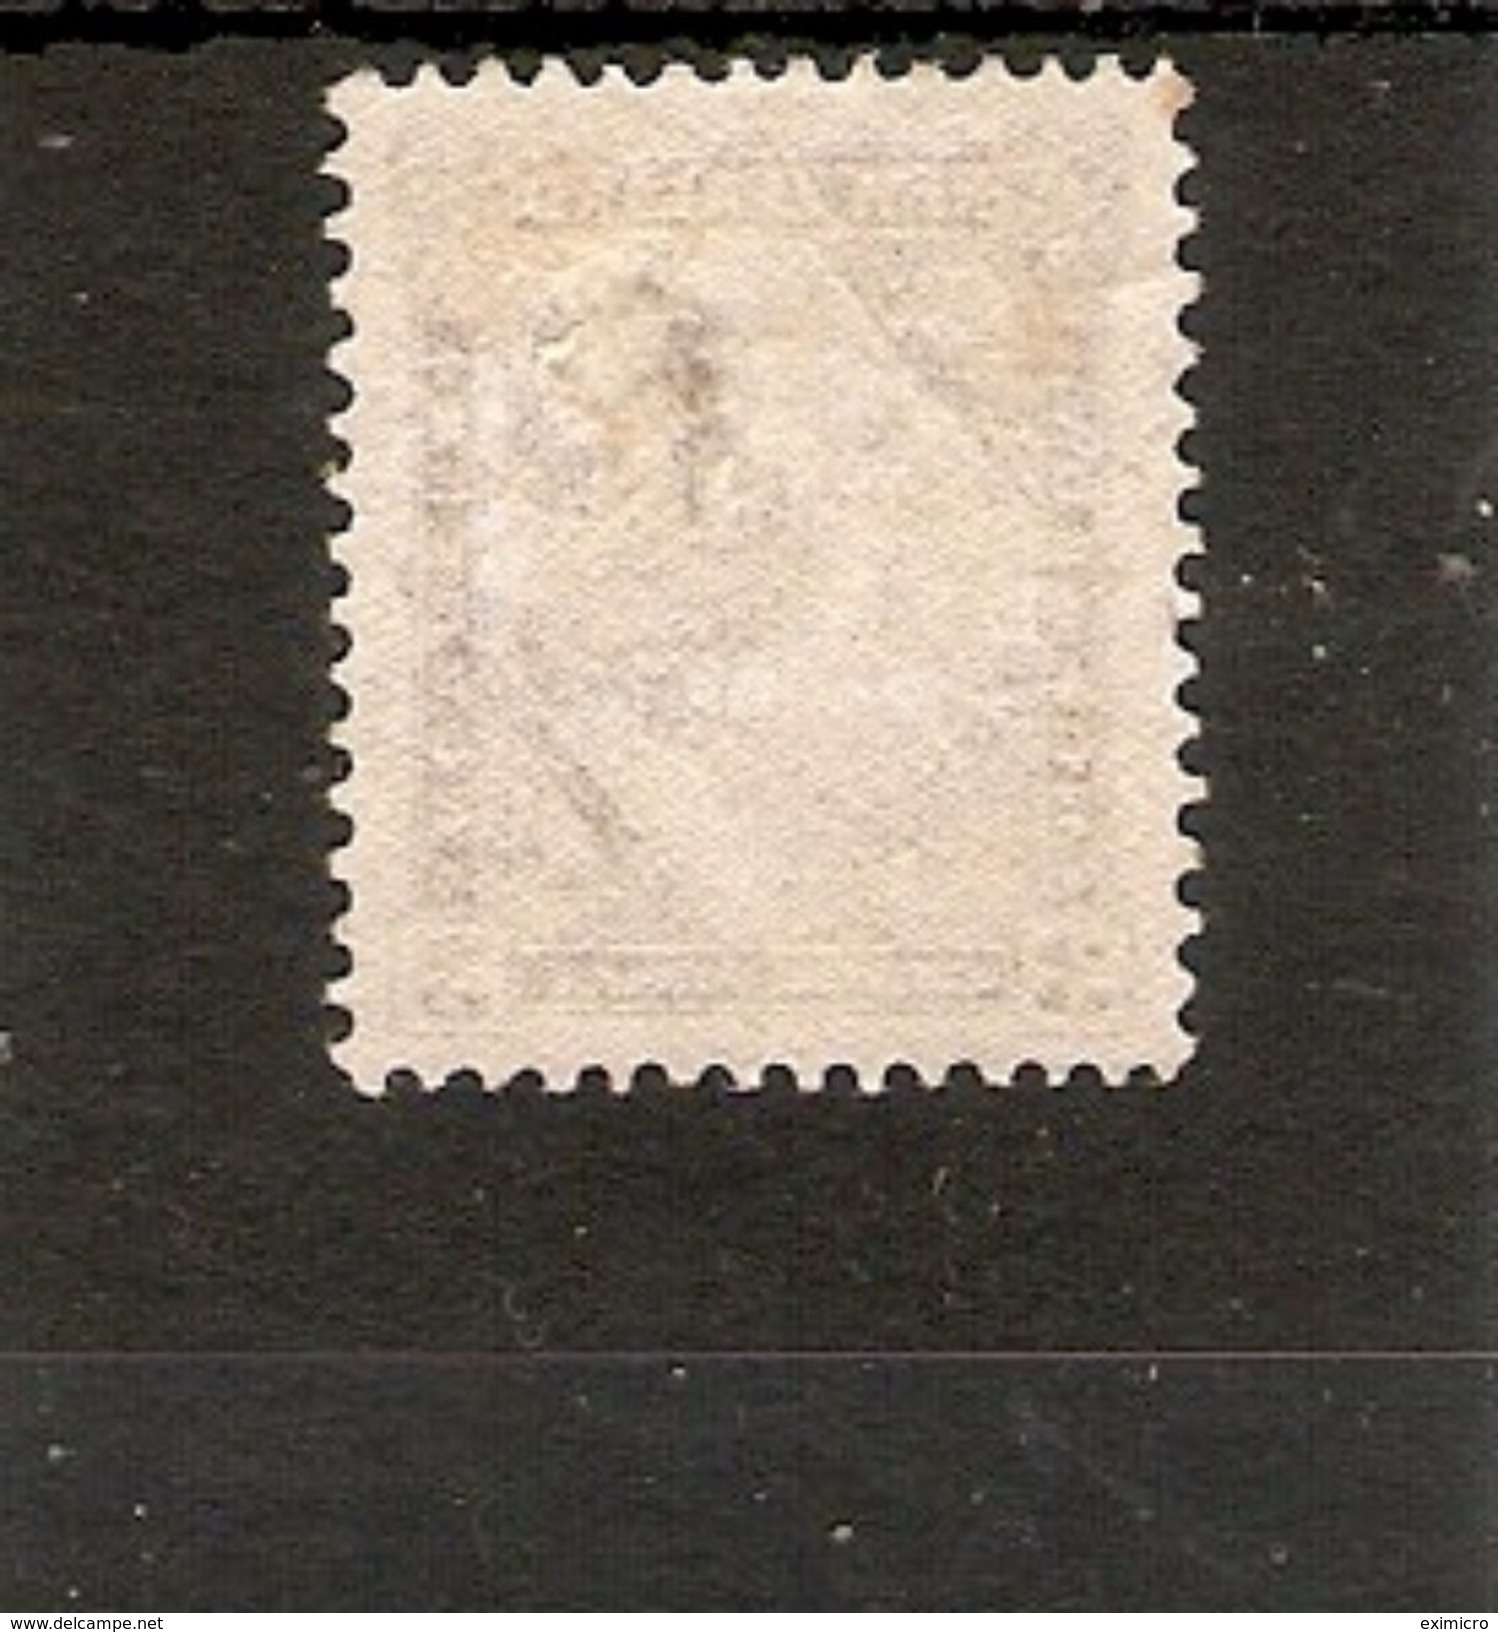 NEW ZEALAND 1935 - 1936 3d SG 561 MOUNTED MINT Cat £12 - Unused Stamps